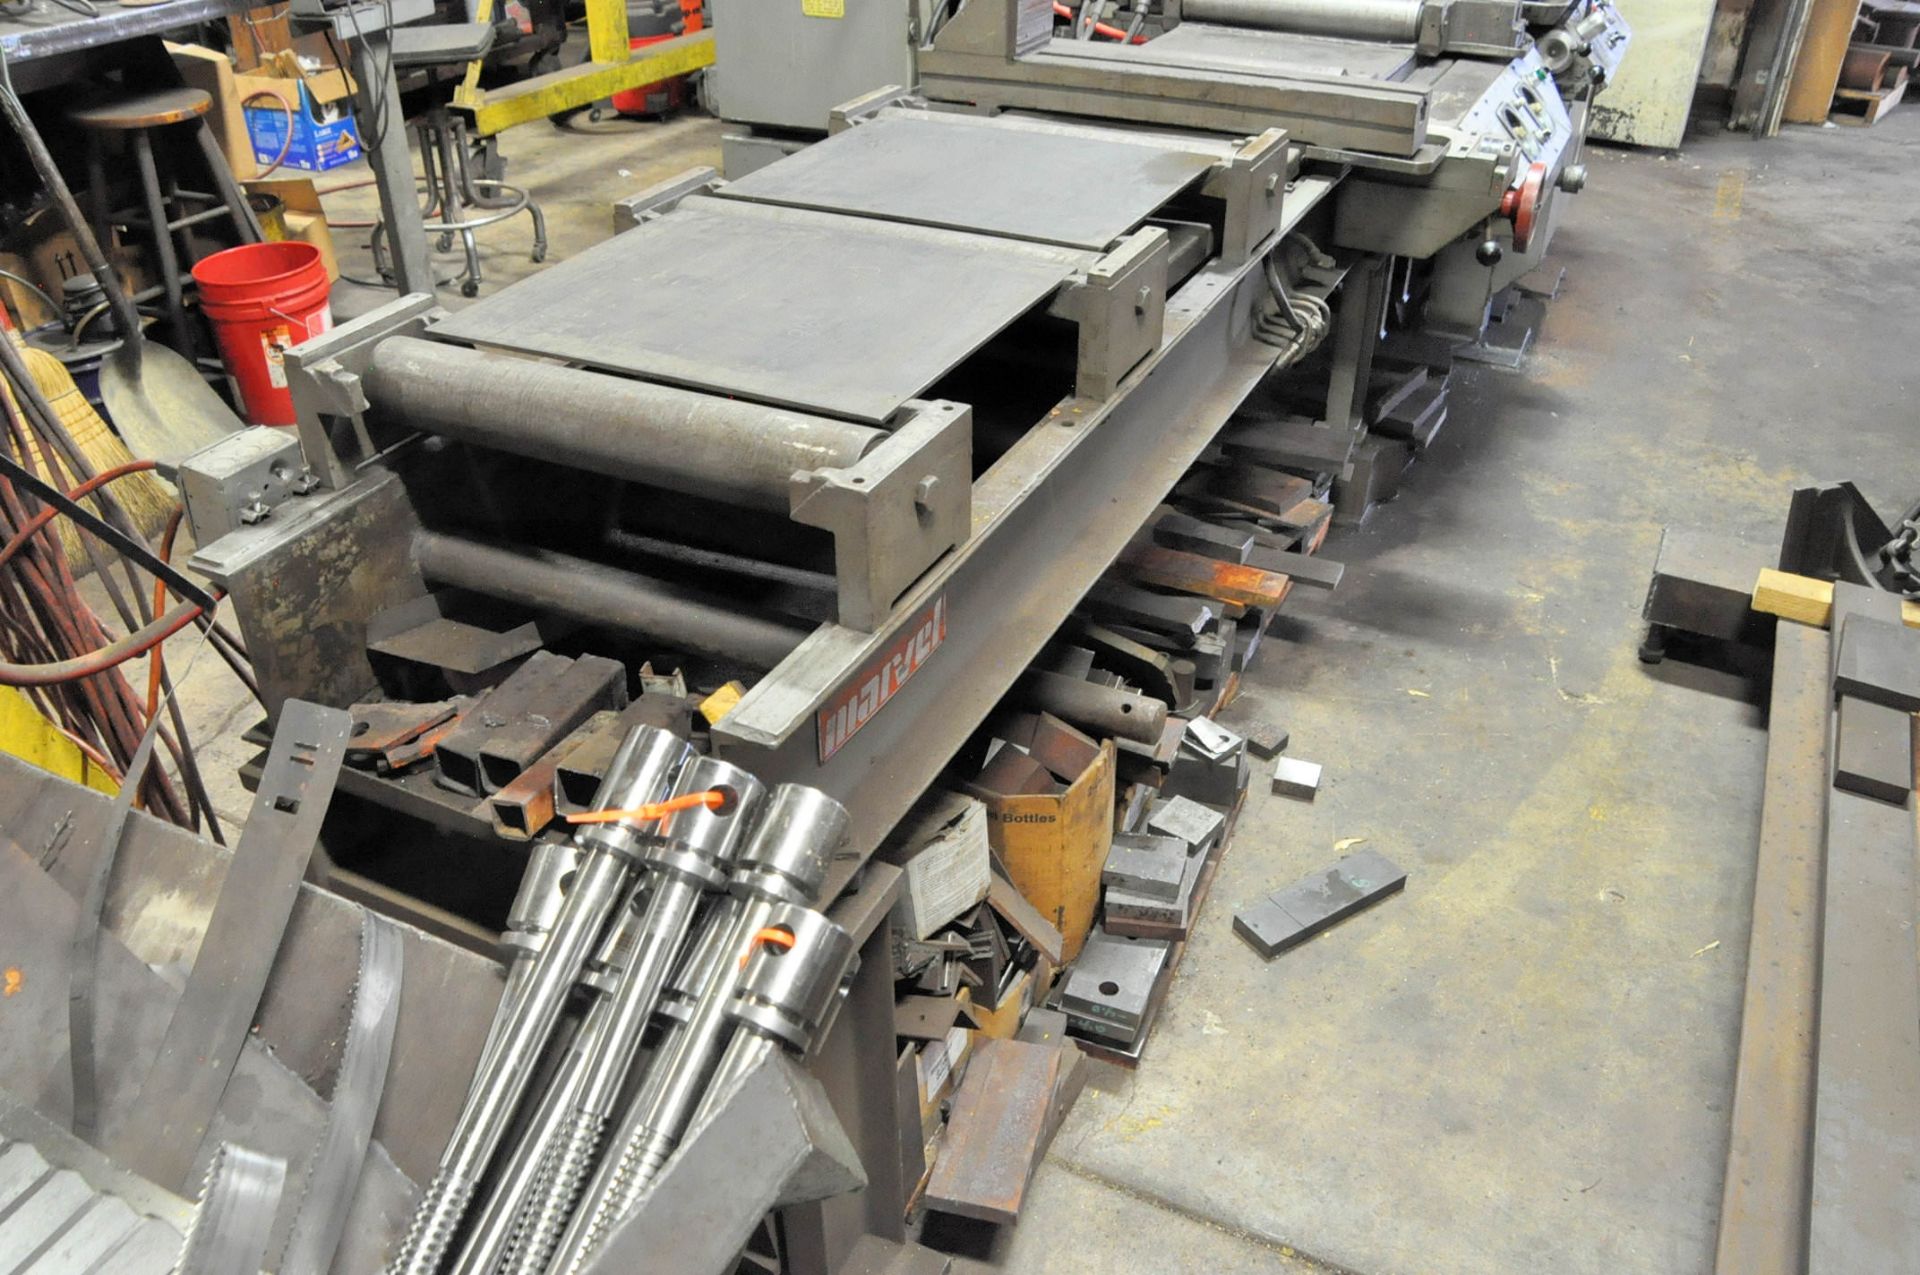 Marvel Series 81A 81A8/M3M/M5, 18" Vertical Metal Cutting Roll-In Band Saw, - Image 8 of 9